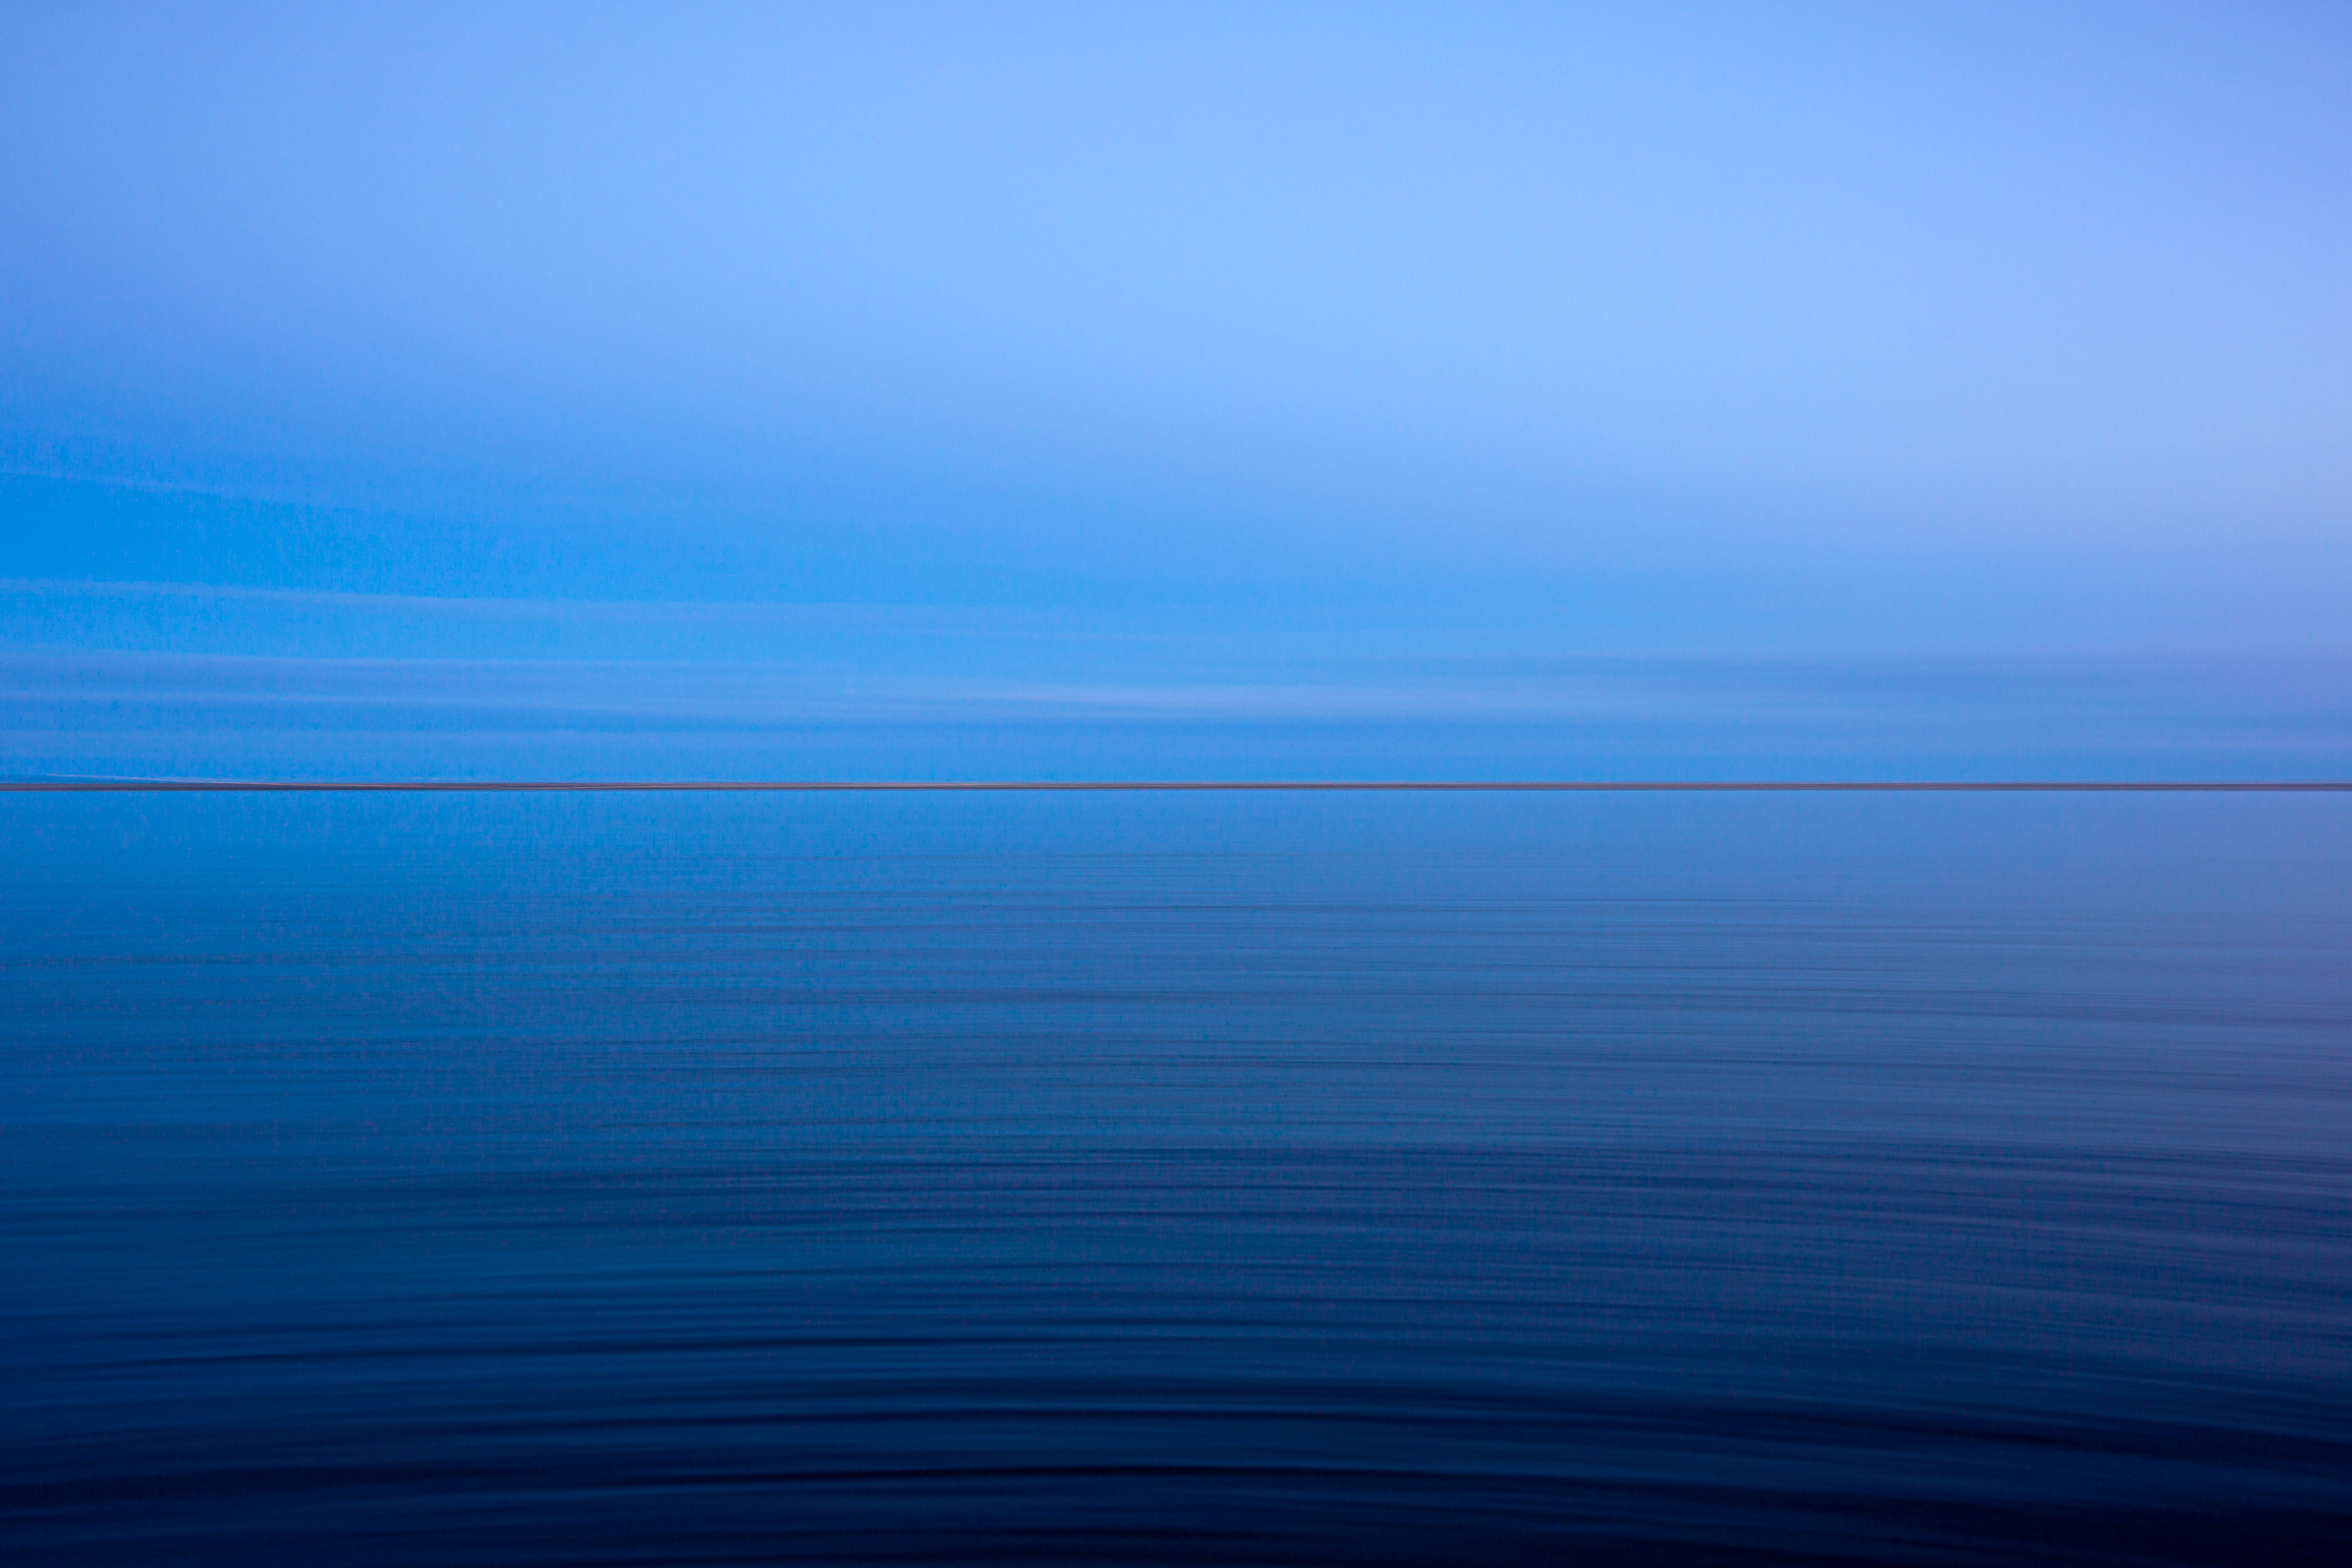 35mm blue hour photograph with the bay in the foreground and a razor thin strip of Long Beach Island in the background. Panning and a slow shudder brings motion blur into the peaceful, minimalist image.